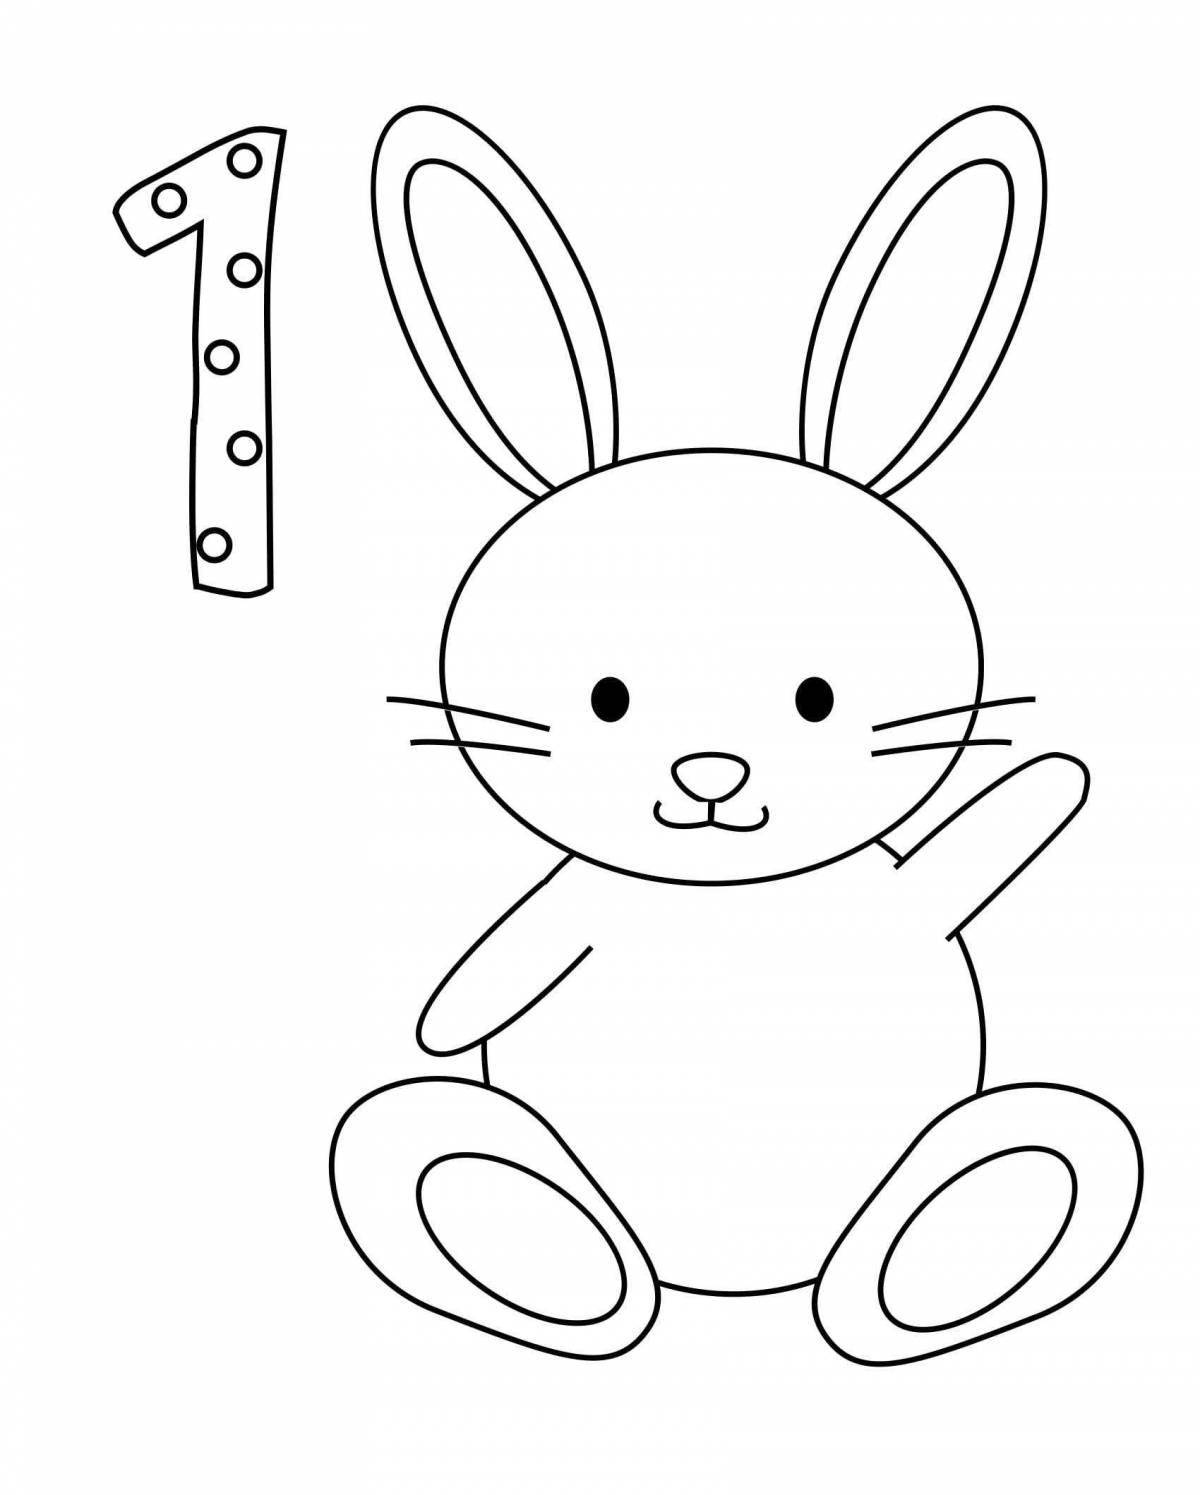 Radiant coloring page bunny drawing